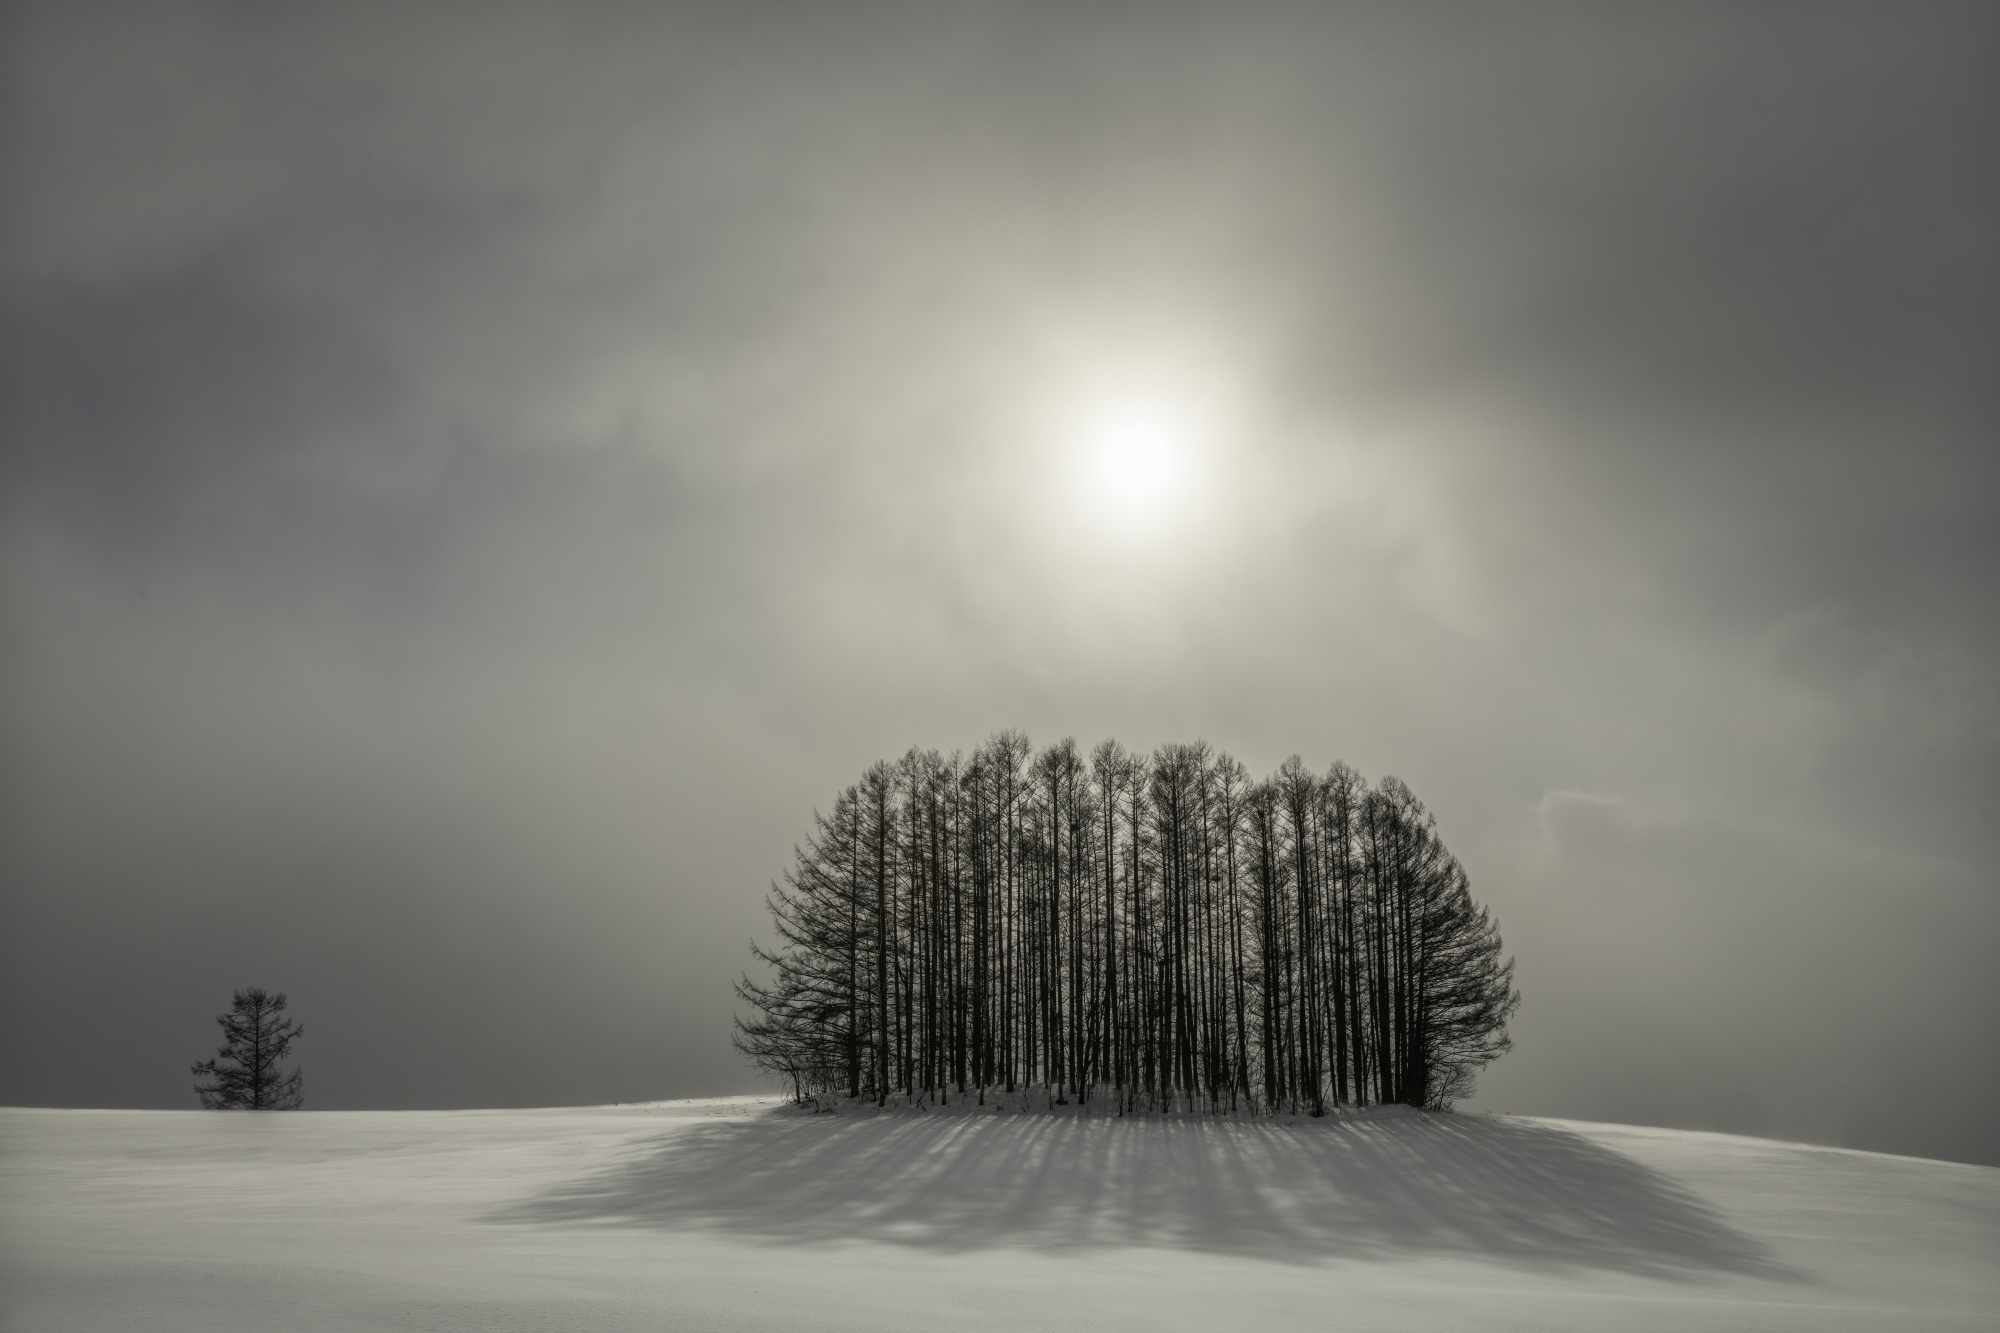 Sun breaking through over a stand of trees in snow covered landscape